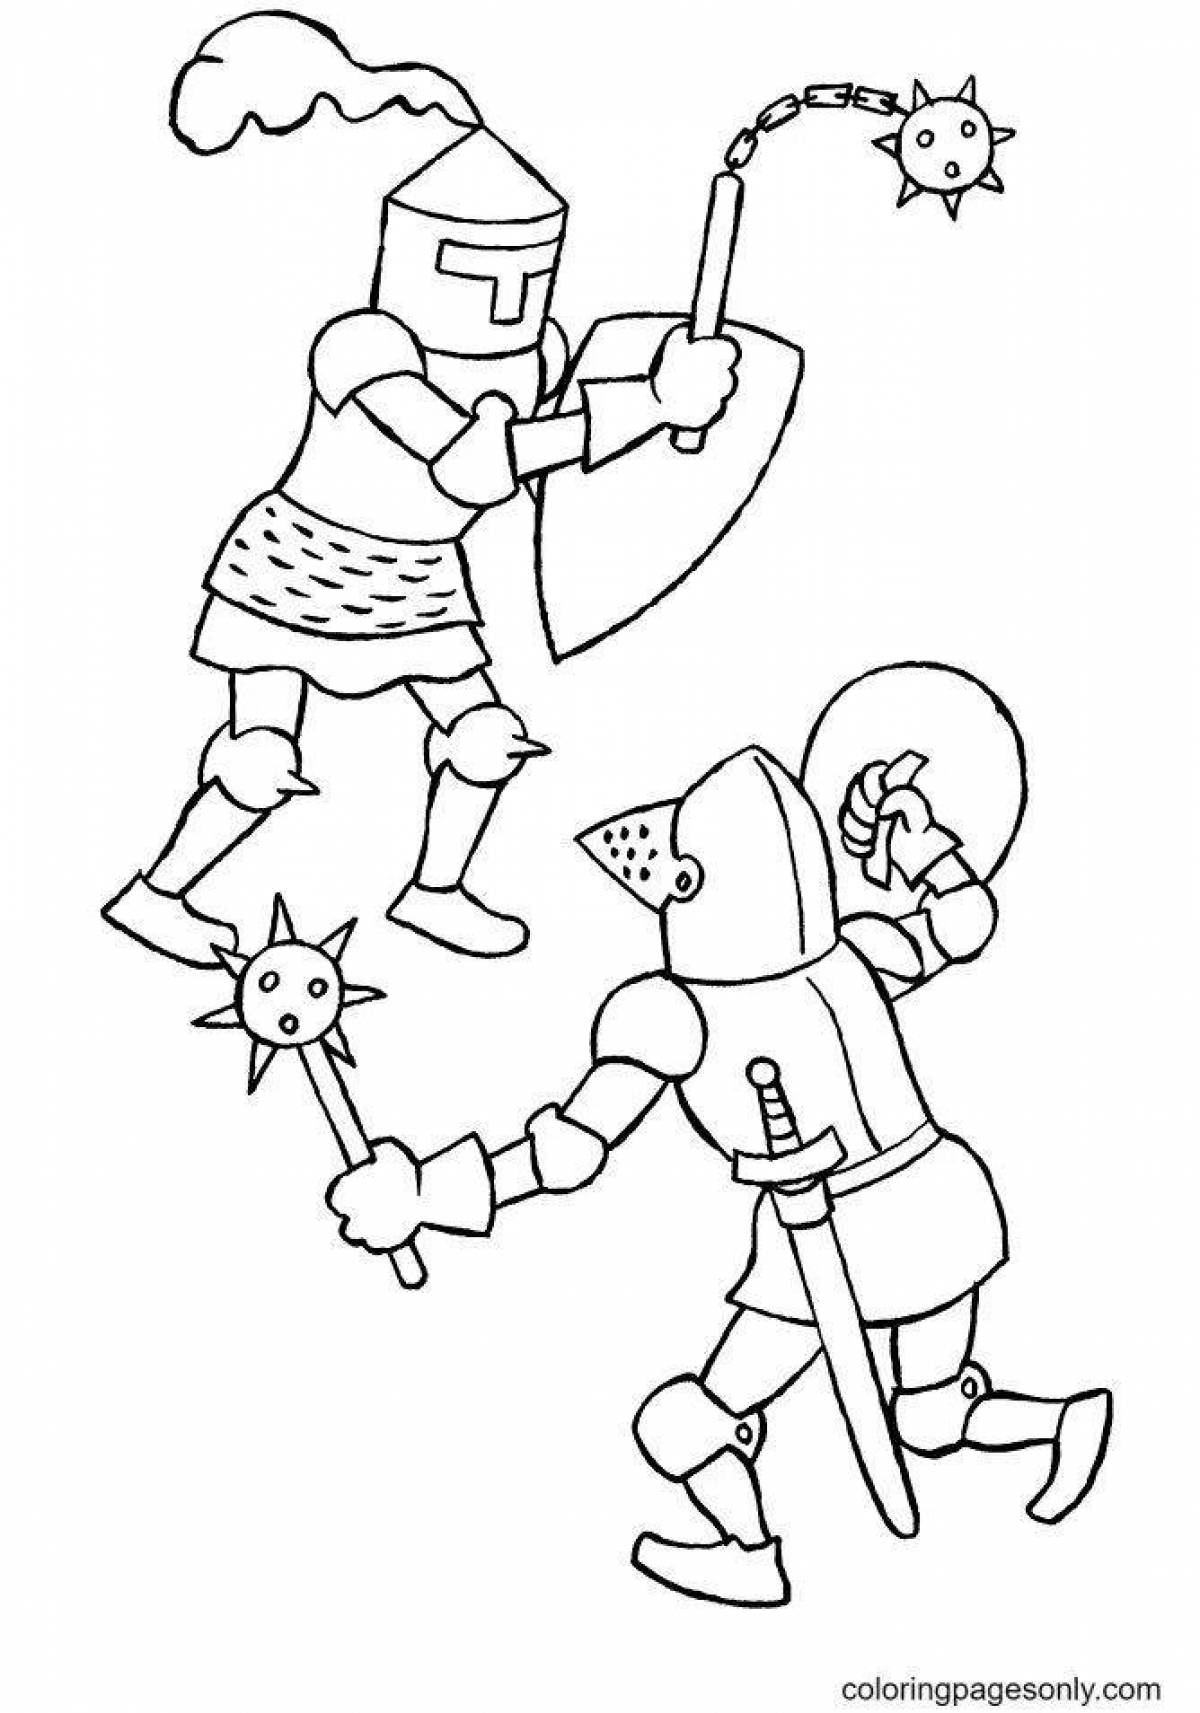 Royal knight coloring book for kids